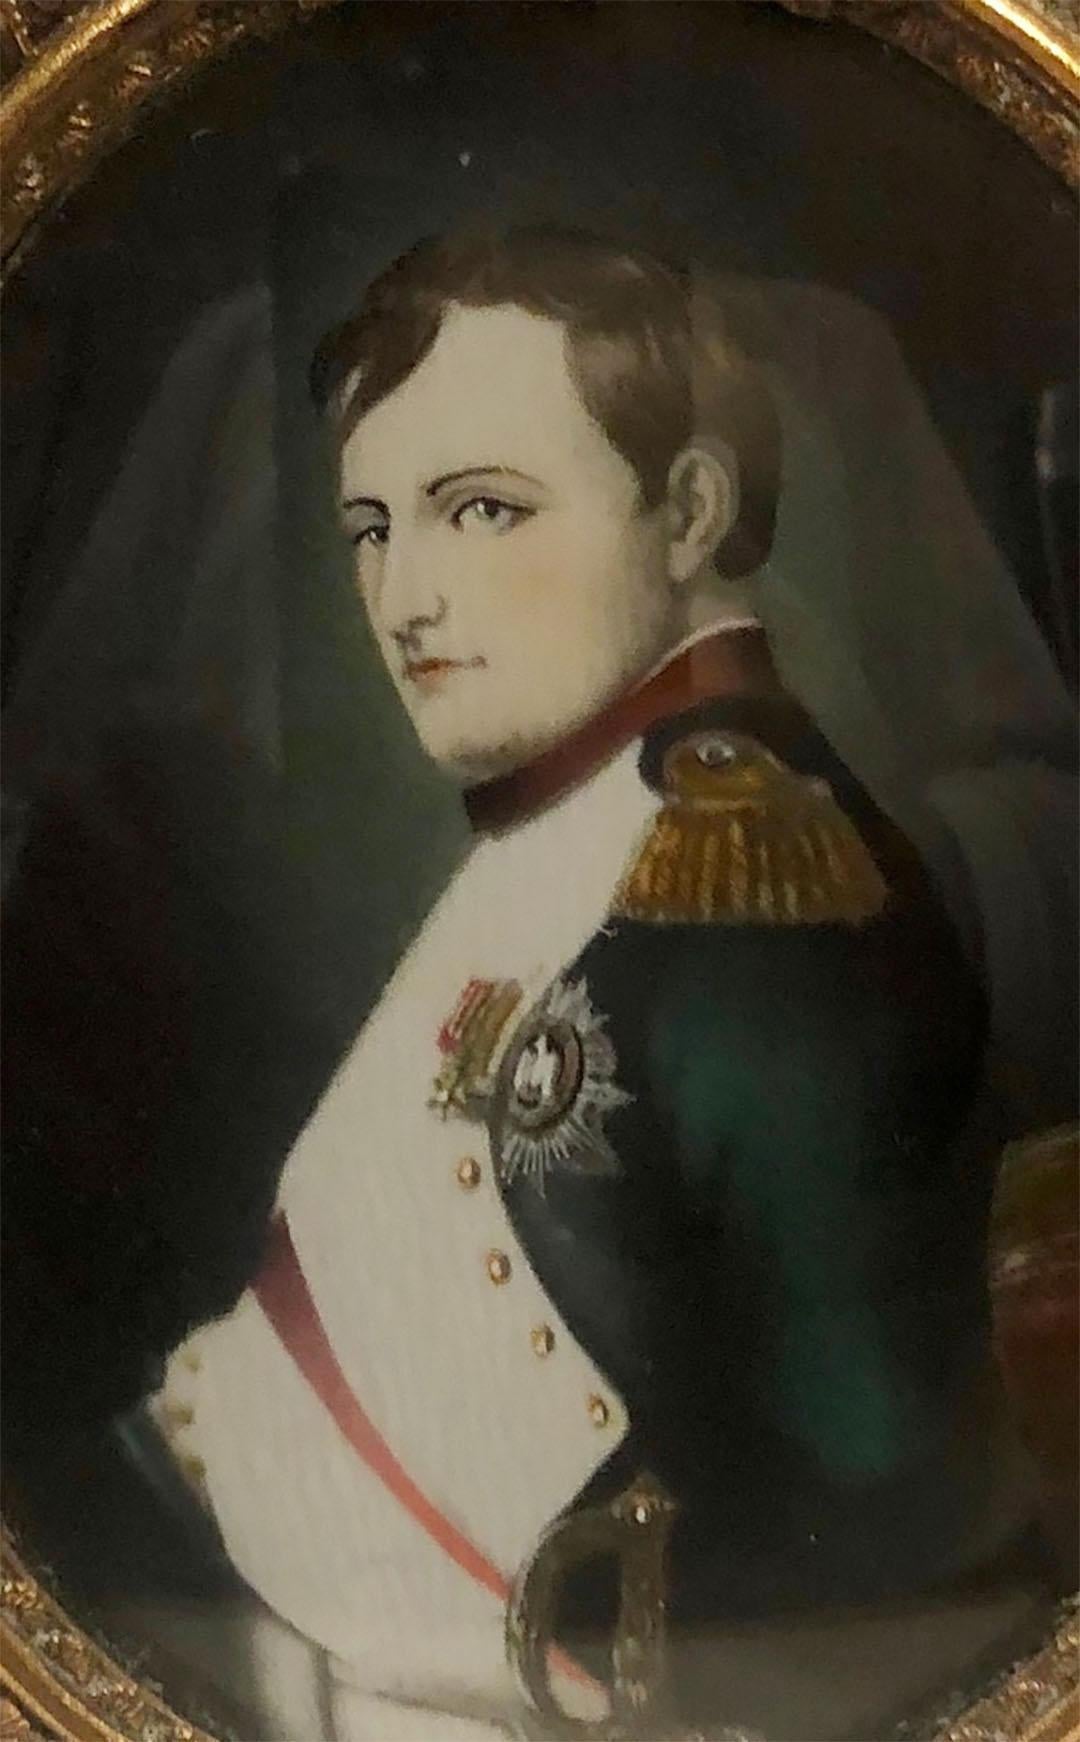 Napoleon Bonaparte on ivory with a an oval doré bronze frame with a bow at the top. Hangs but stands as well, it has an easel back. Signed but I can’t make out the signature. French, late 19th century. 